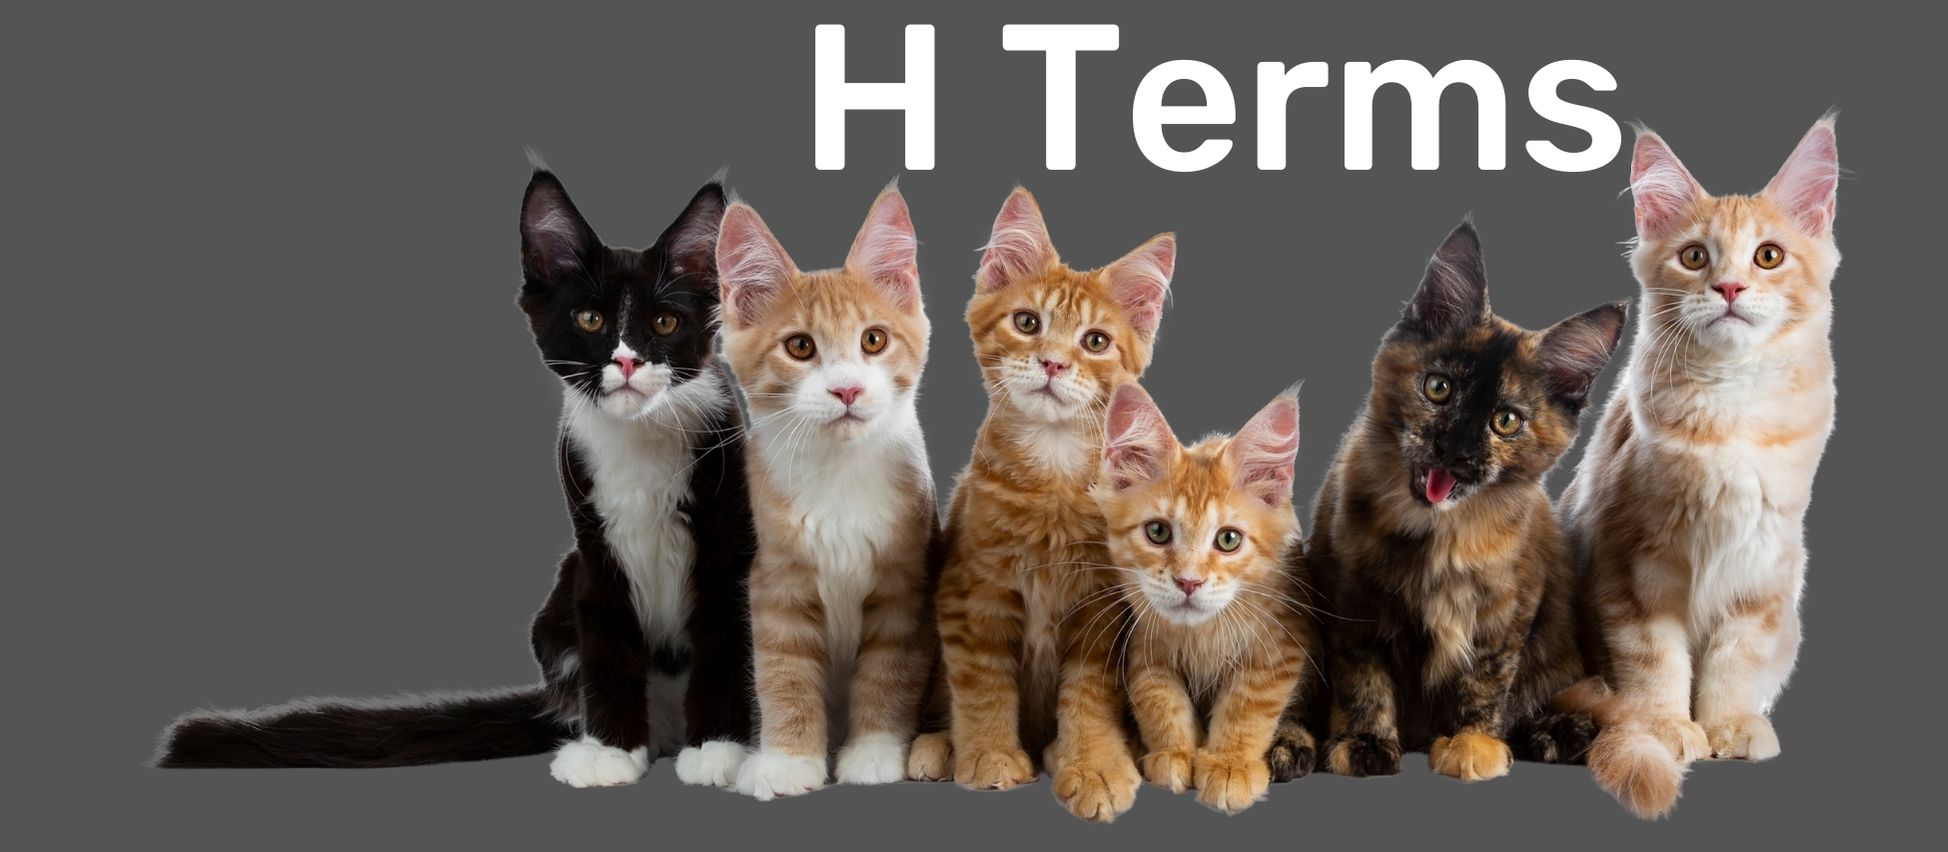 Group of six cats in front of a gray background with text reading 'H Terms' at the top to indicate a new section of the glossary